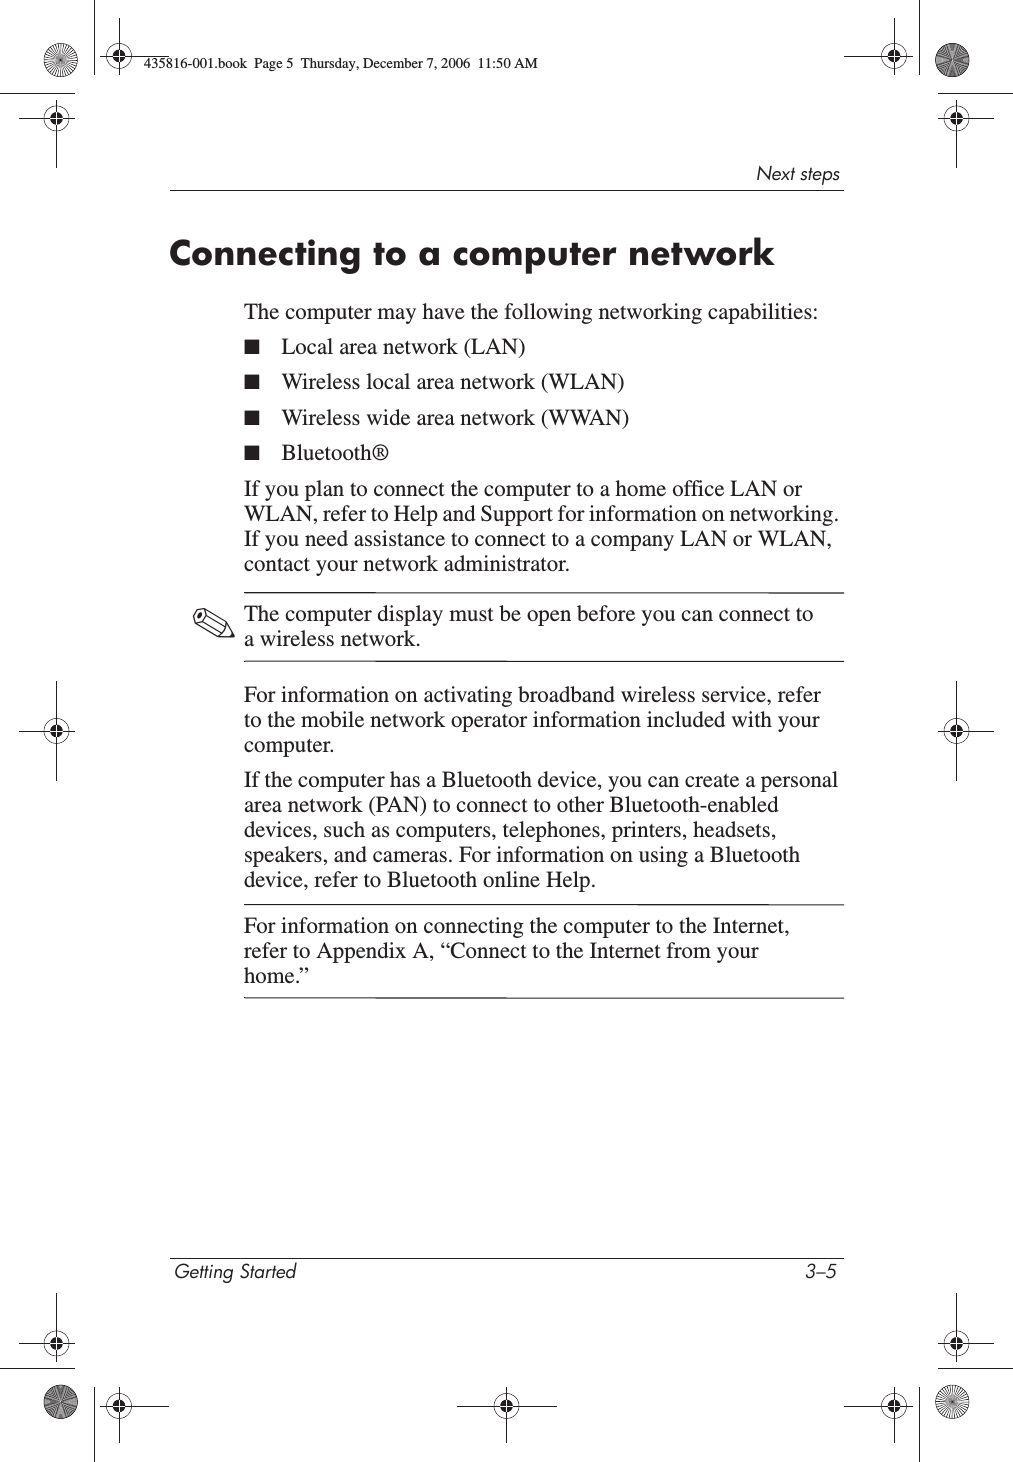 Next stepsGetting Started 3–5Connecting to a computer networkThe computer may have the following networking capabilities:■Local area network (LAN)■Wireless local area network (WLAN)■Wireless wide area network (WWAN)■Bluetooth®If you plan to connect the computer to a home office LAN or WLAN, refer to Help and Support for information on networking. If you need assistance to connect to a company LAN or WLAN, contact your network administrator. ✎The computer display must be open before you can connect to a wireless network.For information on activating broadband wireless service, refer to the mobile network operator information included with your computer.If the computer has a Bluetooth device, you can create a personal area network (PAN) to connect to other Bluetooth-enabled devices, such as computers, telephones, printers, headsets, speakers, and cameras. For information on using a Bluetooth device, refer to Bluetooth online Help.For information on connecting the computer to the Internet, refer to Appendix A, “Connect to the Internet from your home.”435816-001.book  Page 5  Thursday, December 7, 2006  11:50 AM